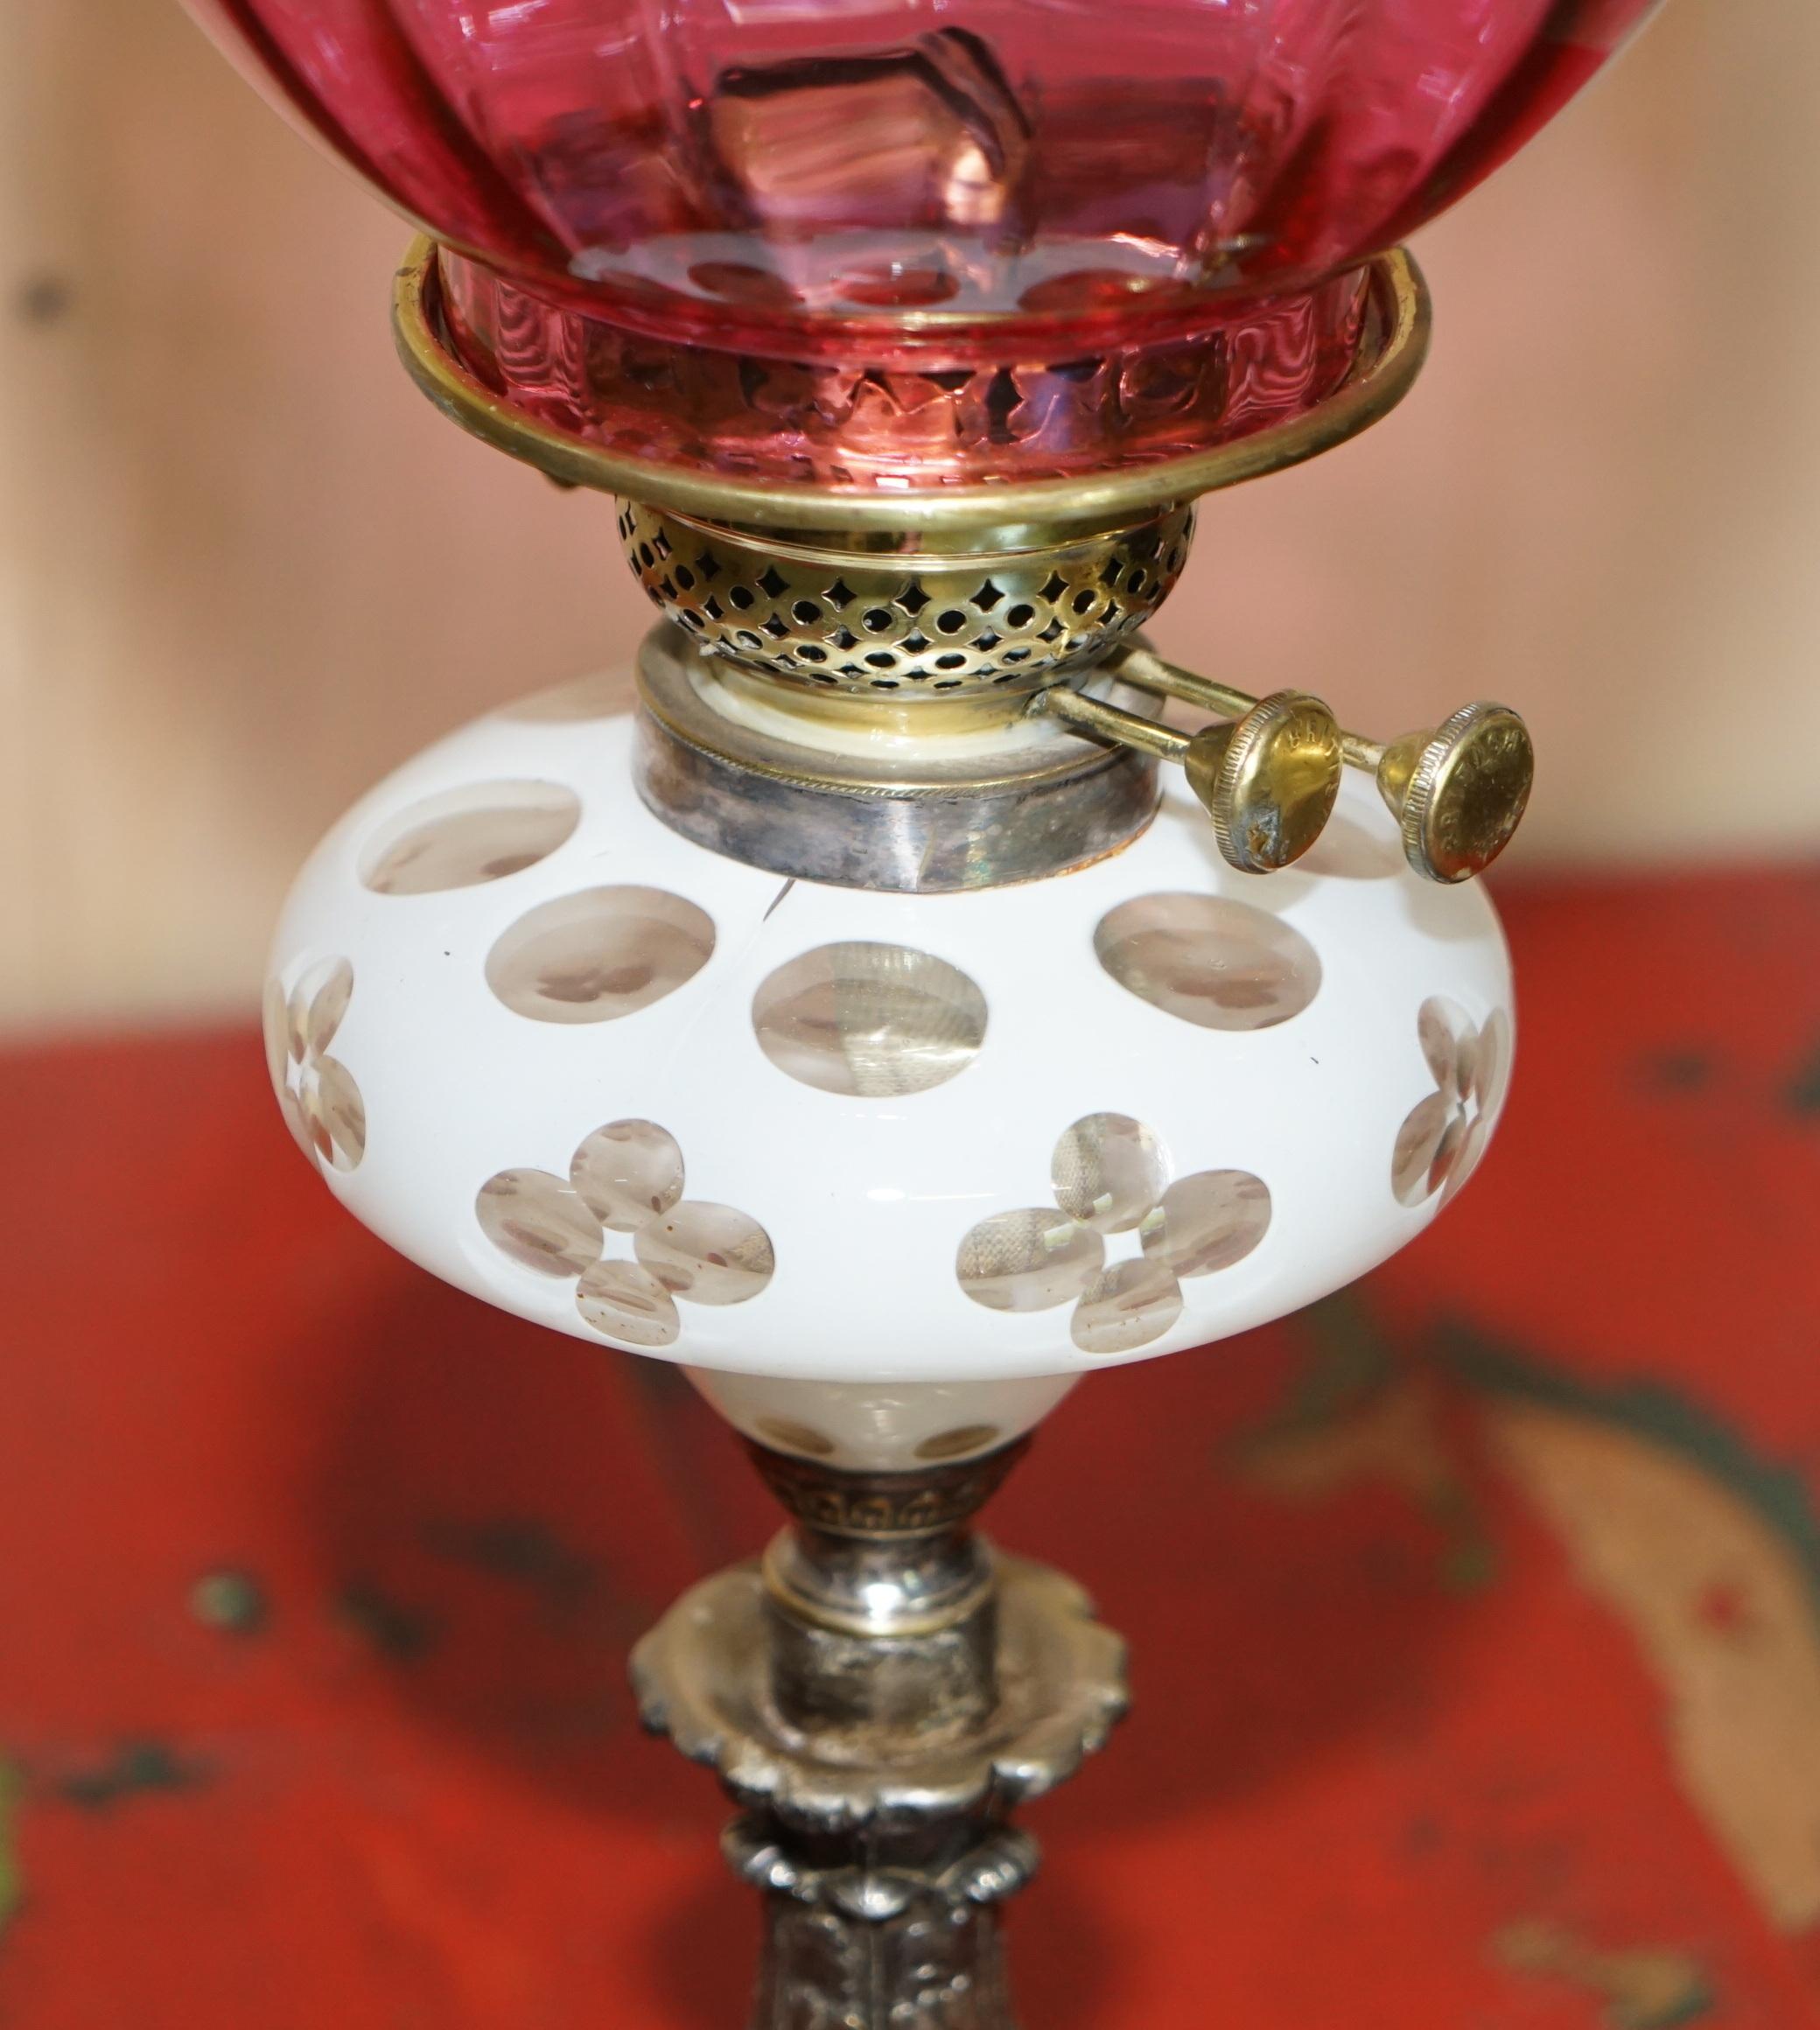 Hand-Crafted Anitique Repousse Brass Victorian Oil Lamp Original Etched Glass & Ruby Shade